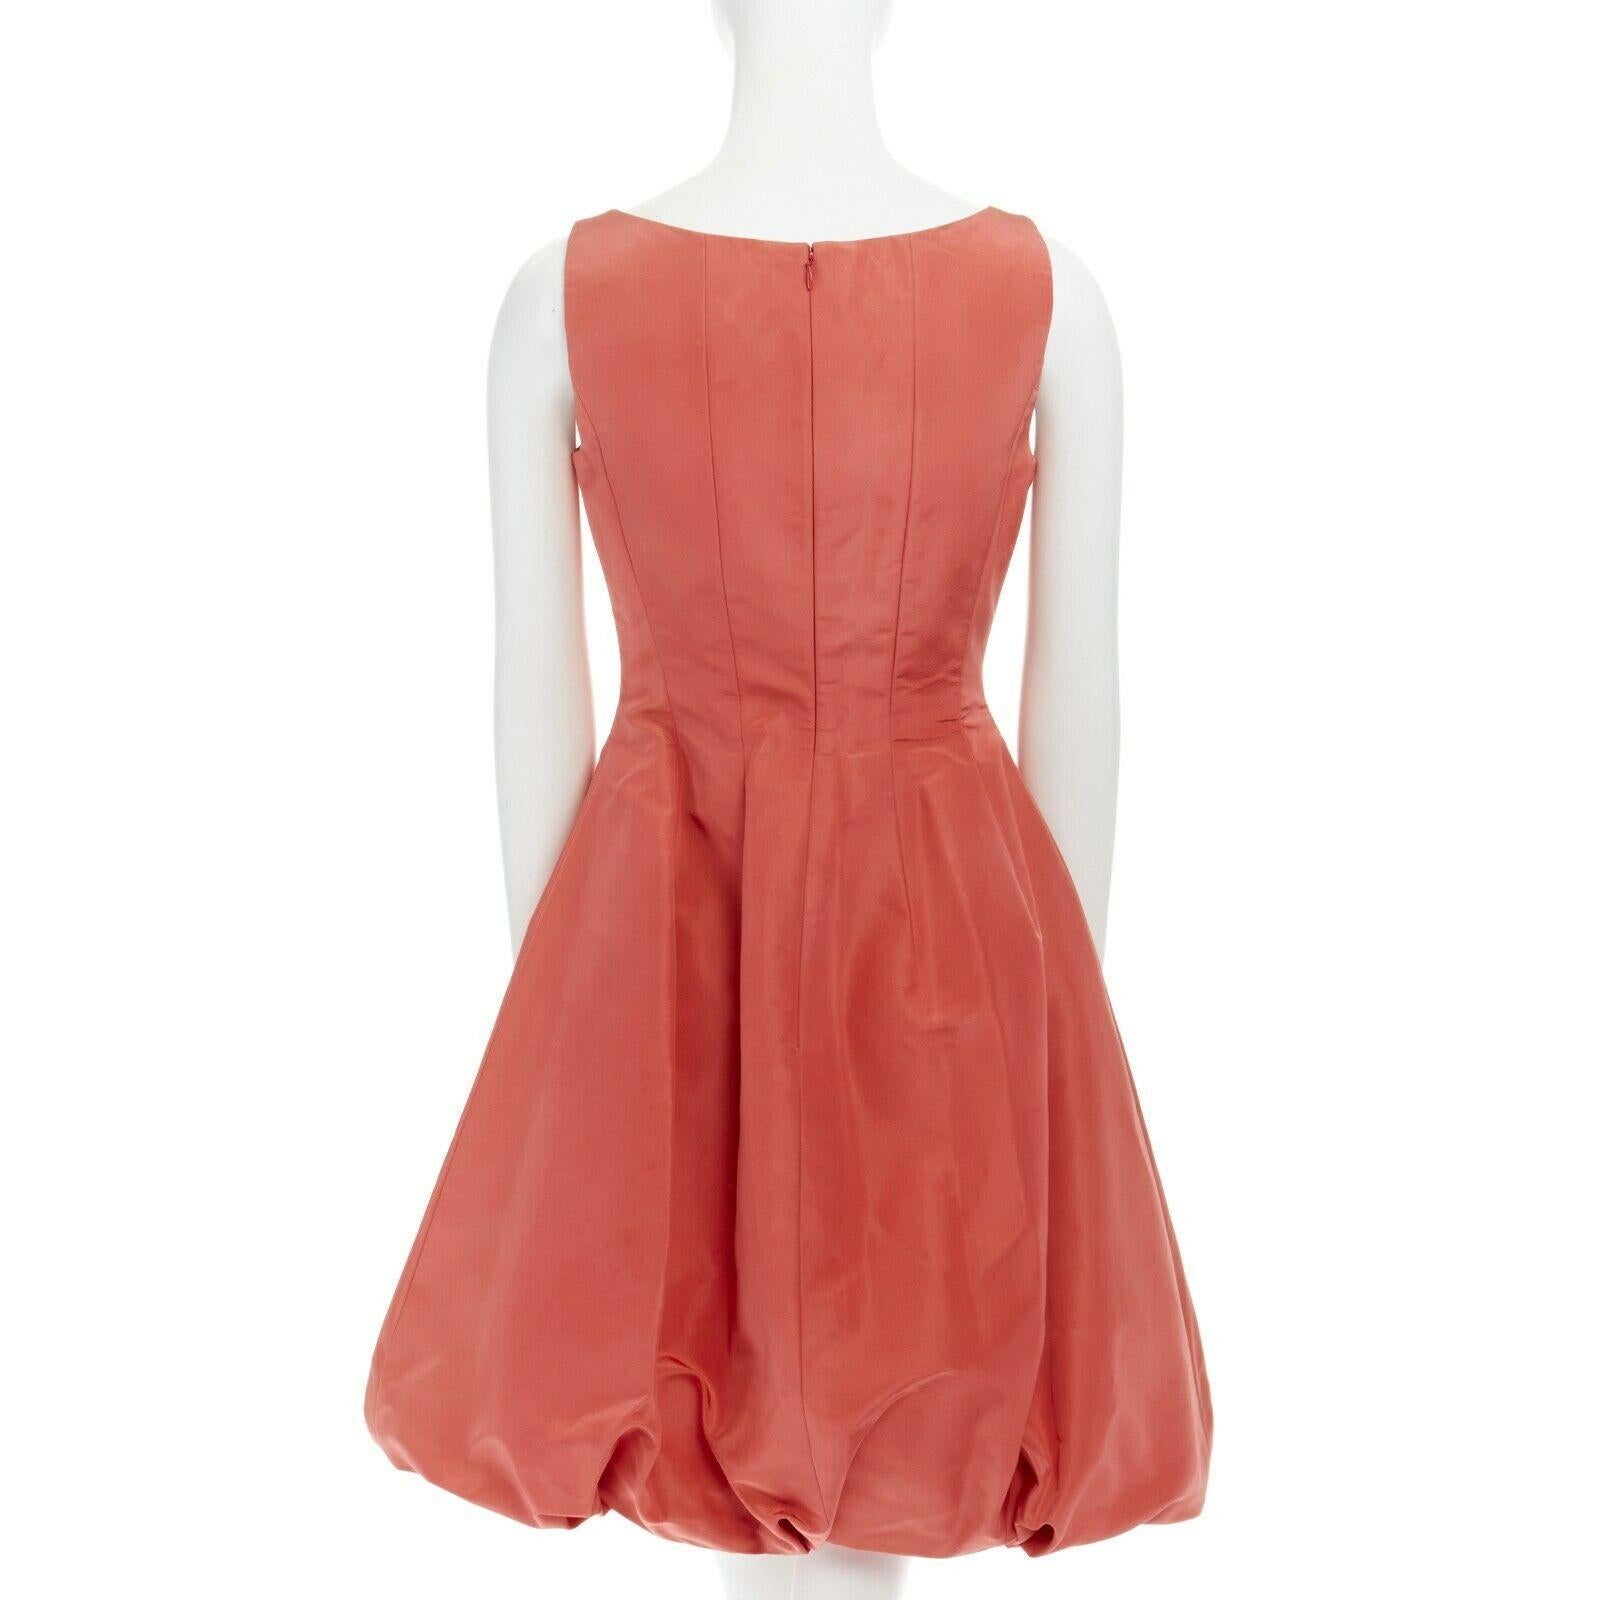 new OSCAR DE LA RENTA R12 coral pink 100% silk bubble skirt cocktail dress US4
OSCAR DE LA RENTA
FROM THE RESORT 2012 COLLECTION
100% silk. 
Coral pink. 
Scoop neck. 
Sleeveless. 
Bodycon curved seams fitted bodice. 
Voluminous bubble skirt.